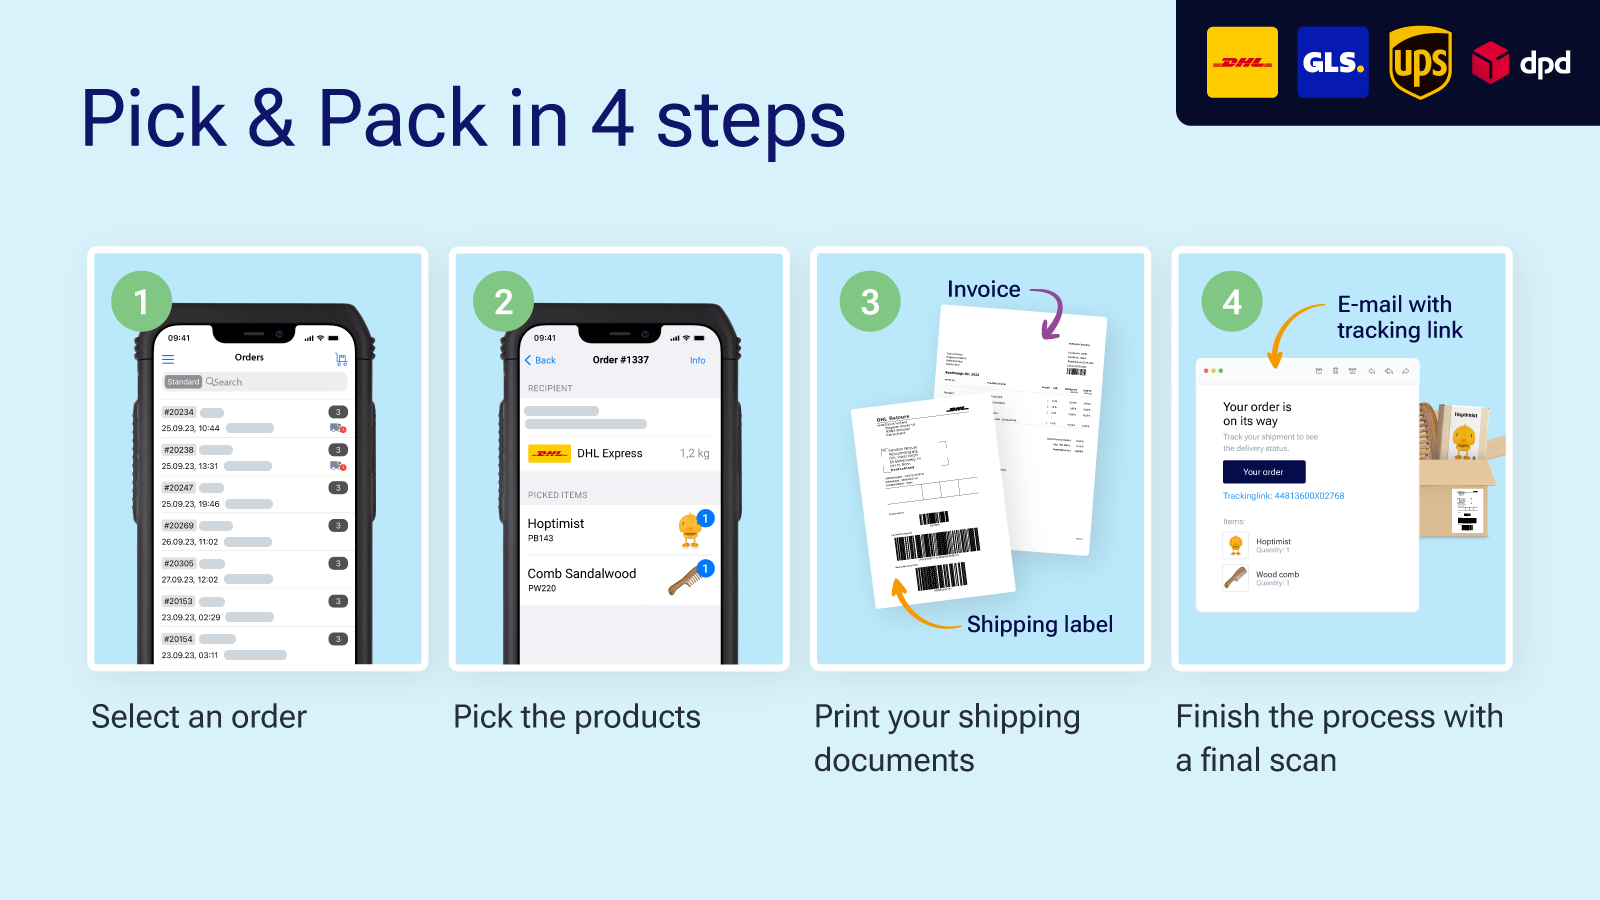 Pick & pack in 4 steps with Pickware barcode scanners